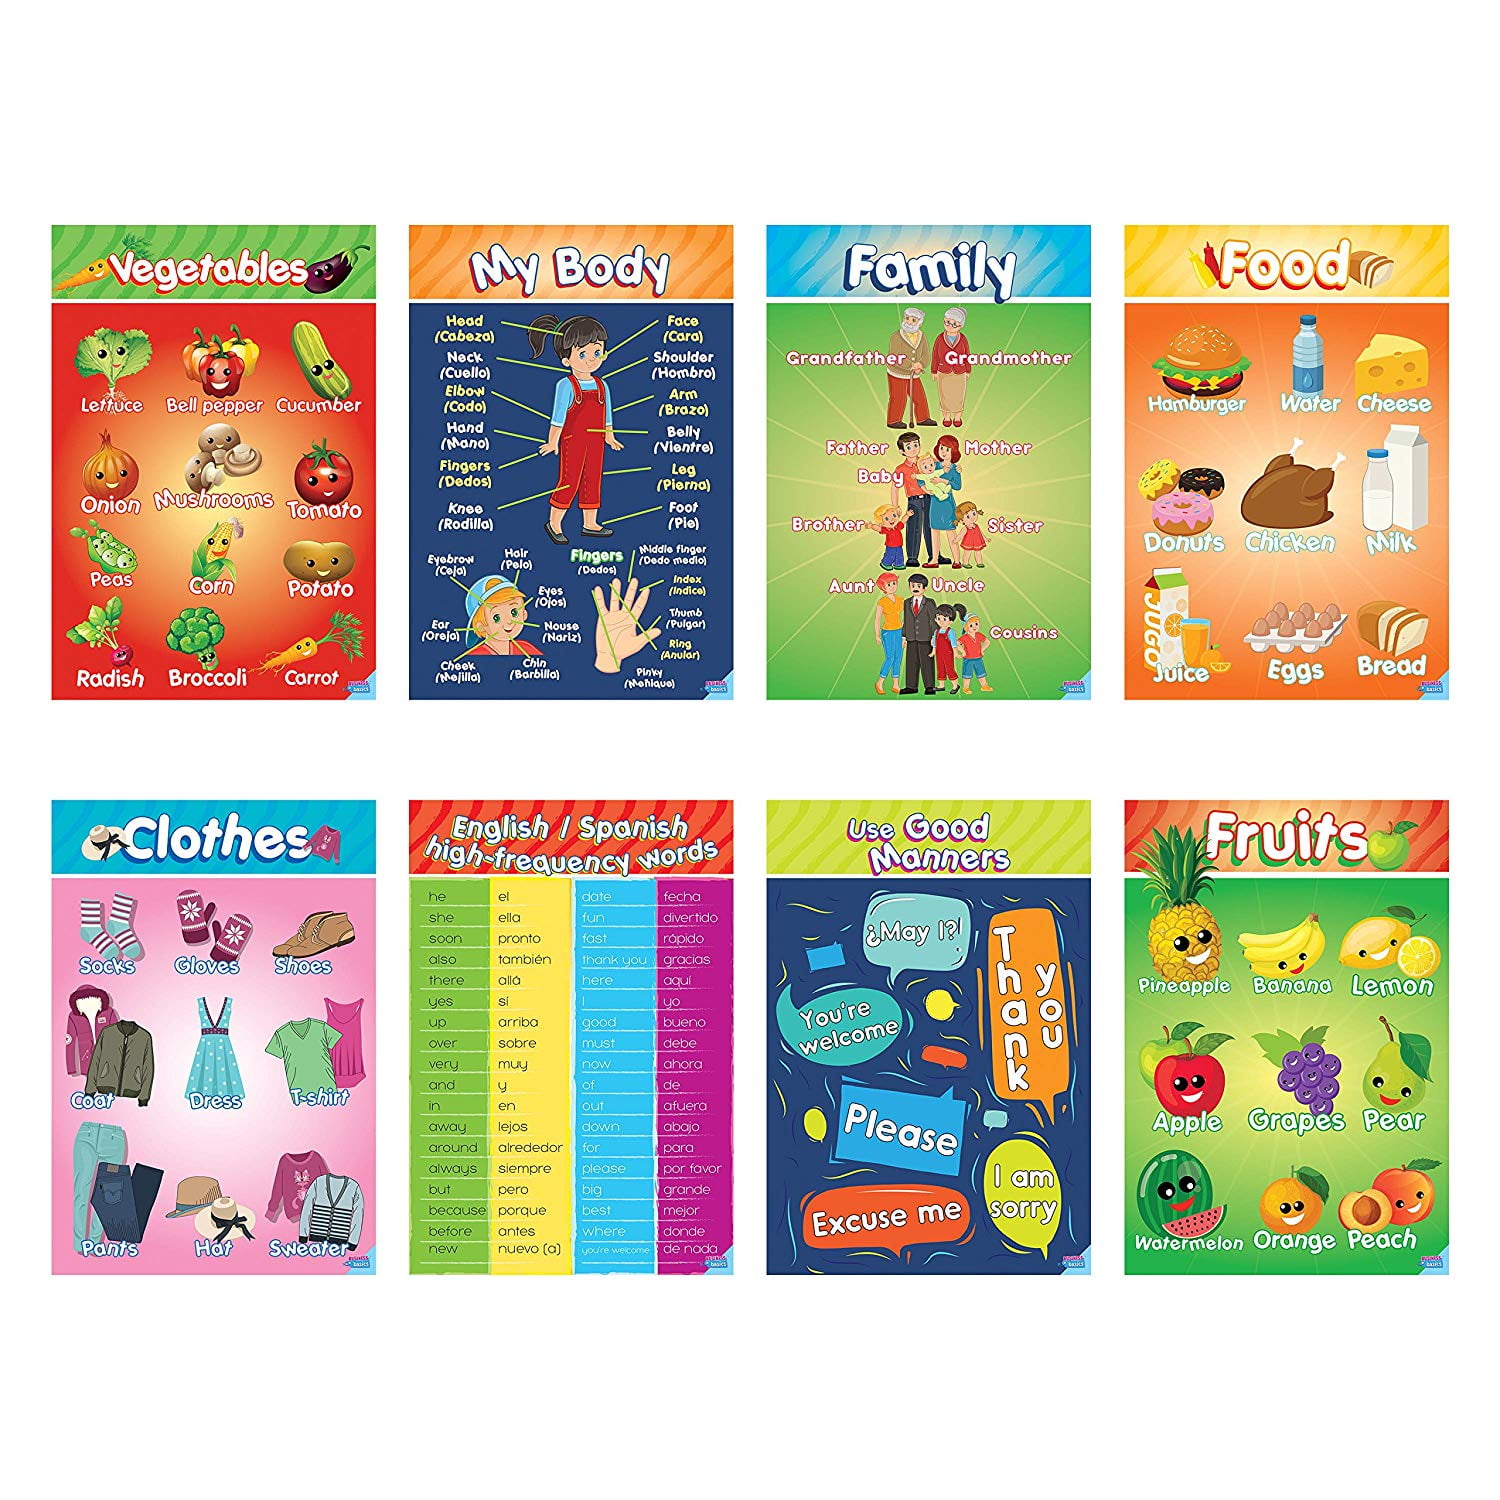 Details about   STOBOK 10PCS Creative Educational Posters Learning Vivid Funny Charts for Kids 